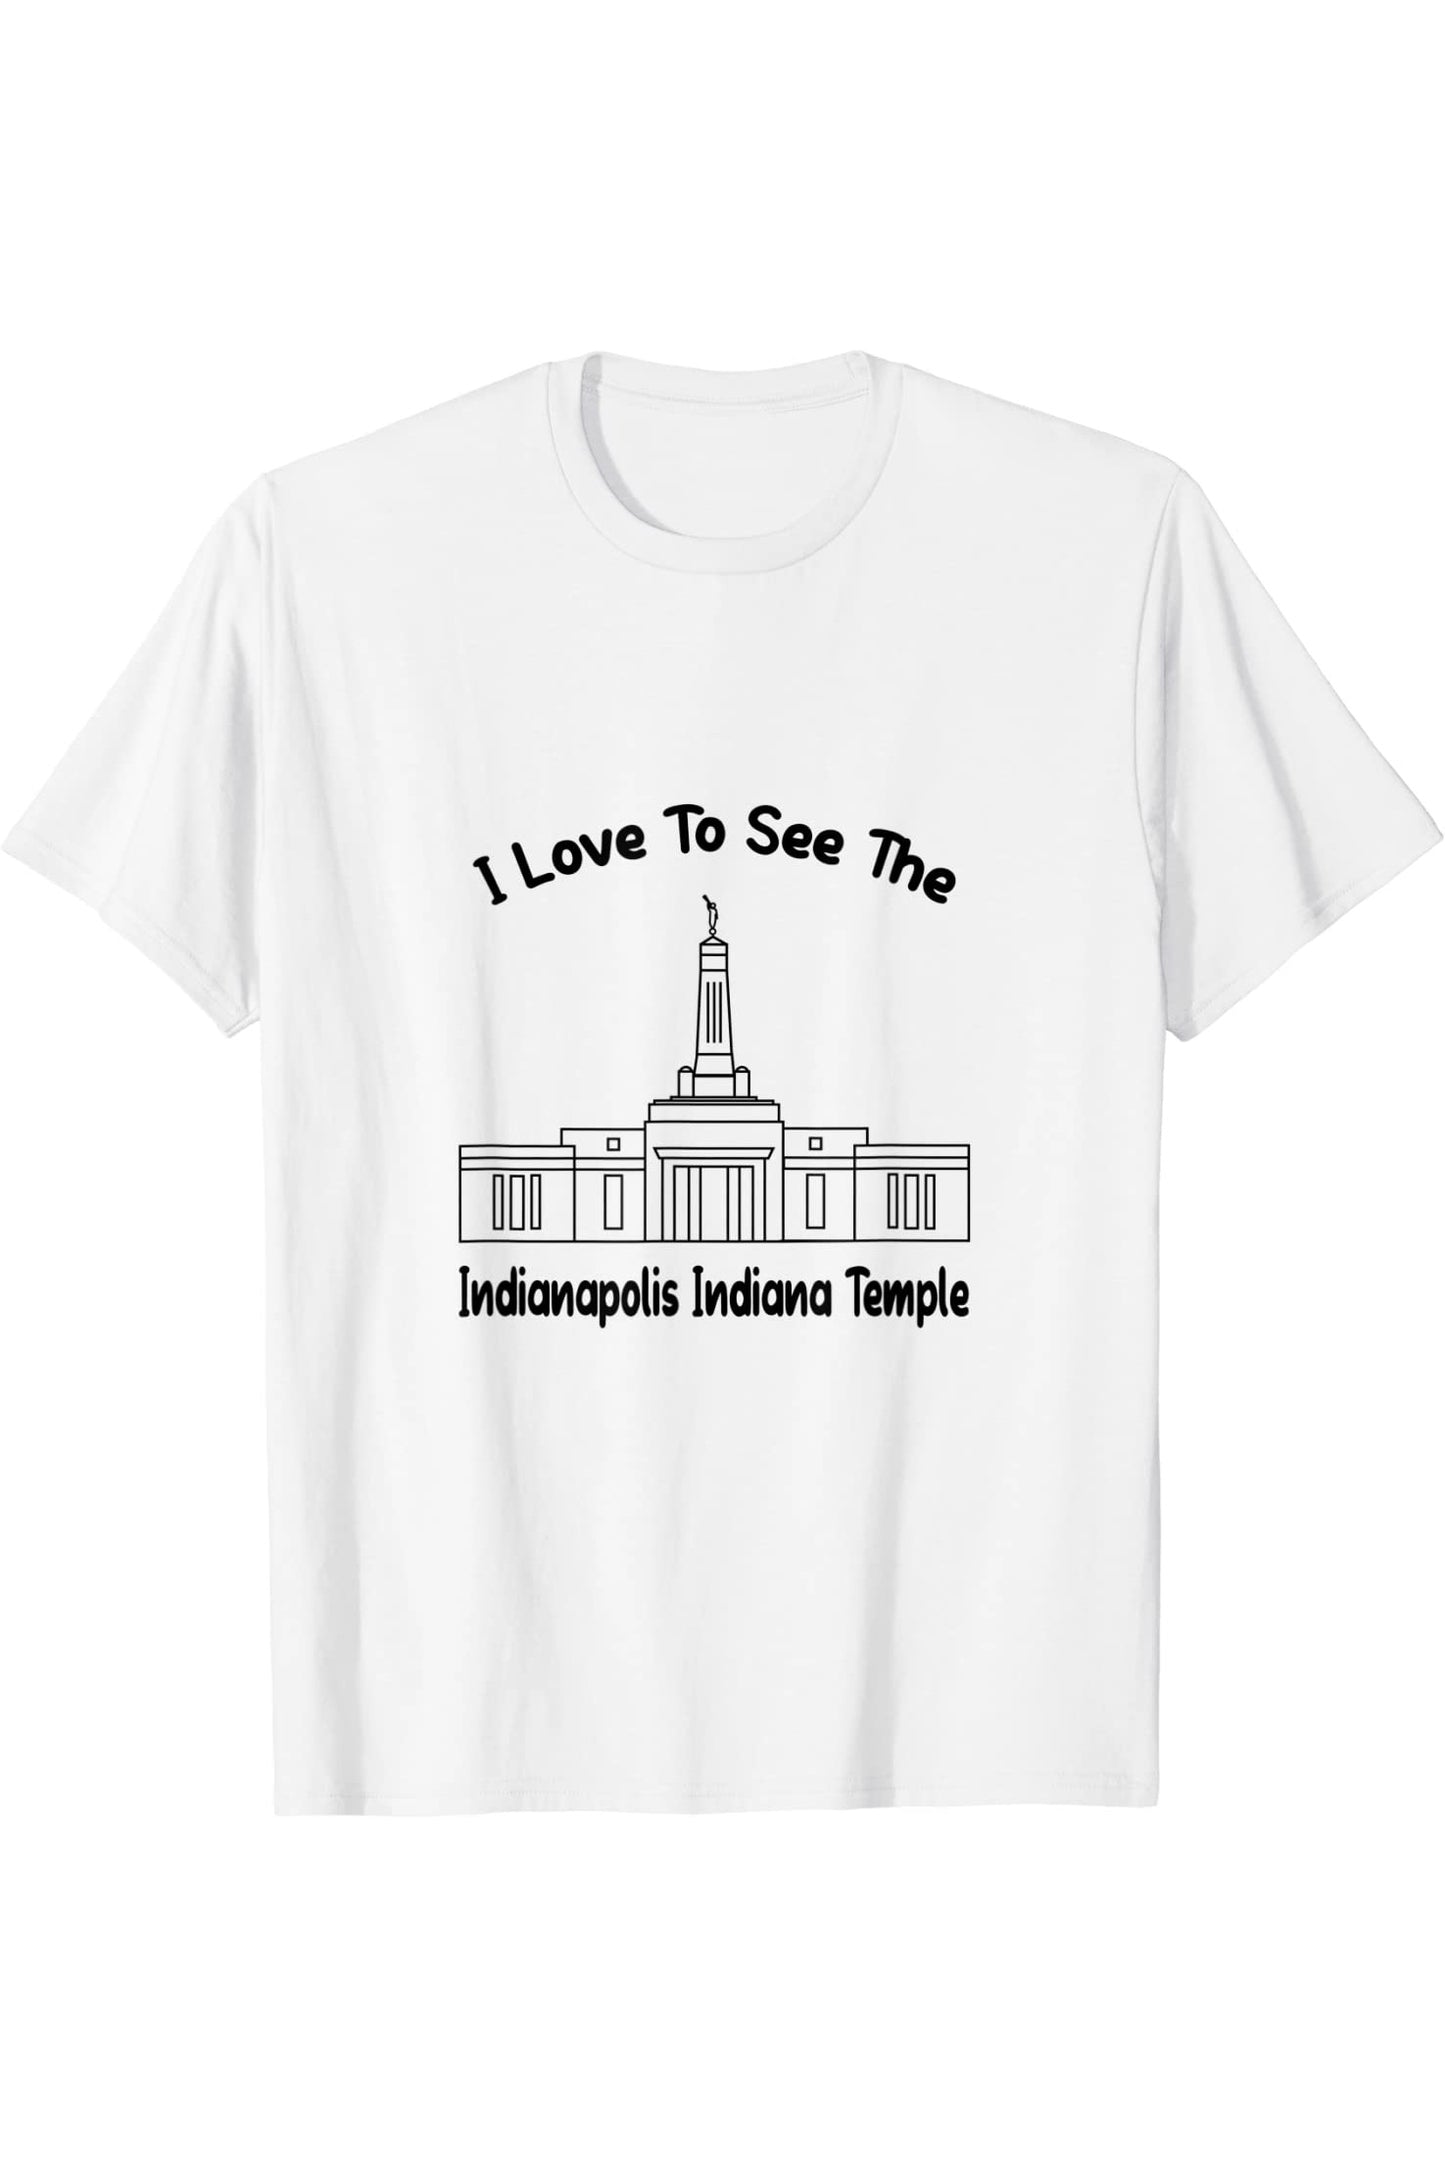 Indianapolis Indiana Temple T-Shirt - Primary Style (English) US